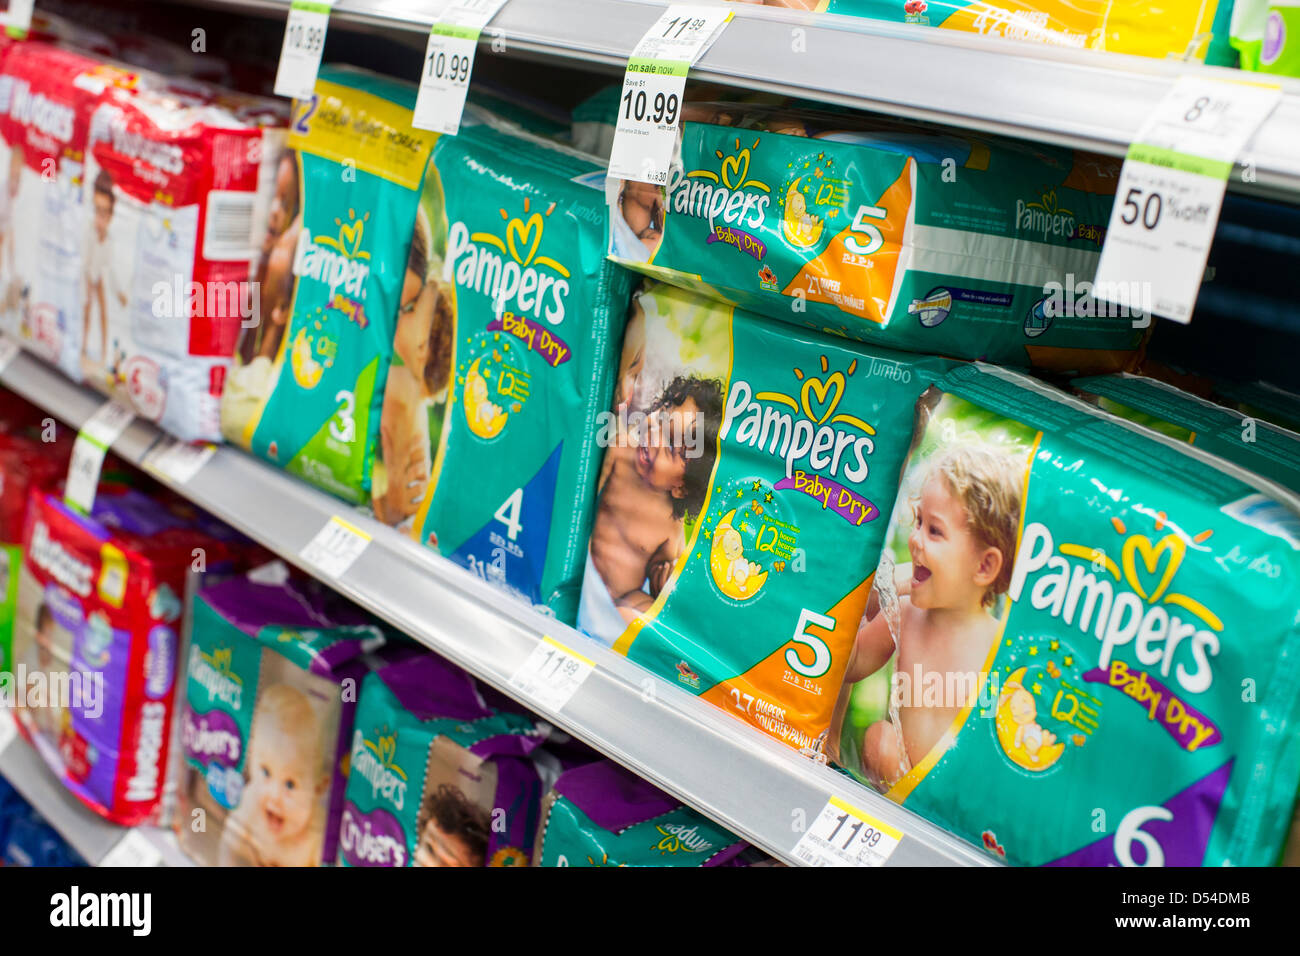 Pampers diapers on display at a Walgreens Flagship store Stock Photo - Alamy